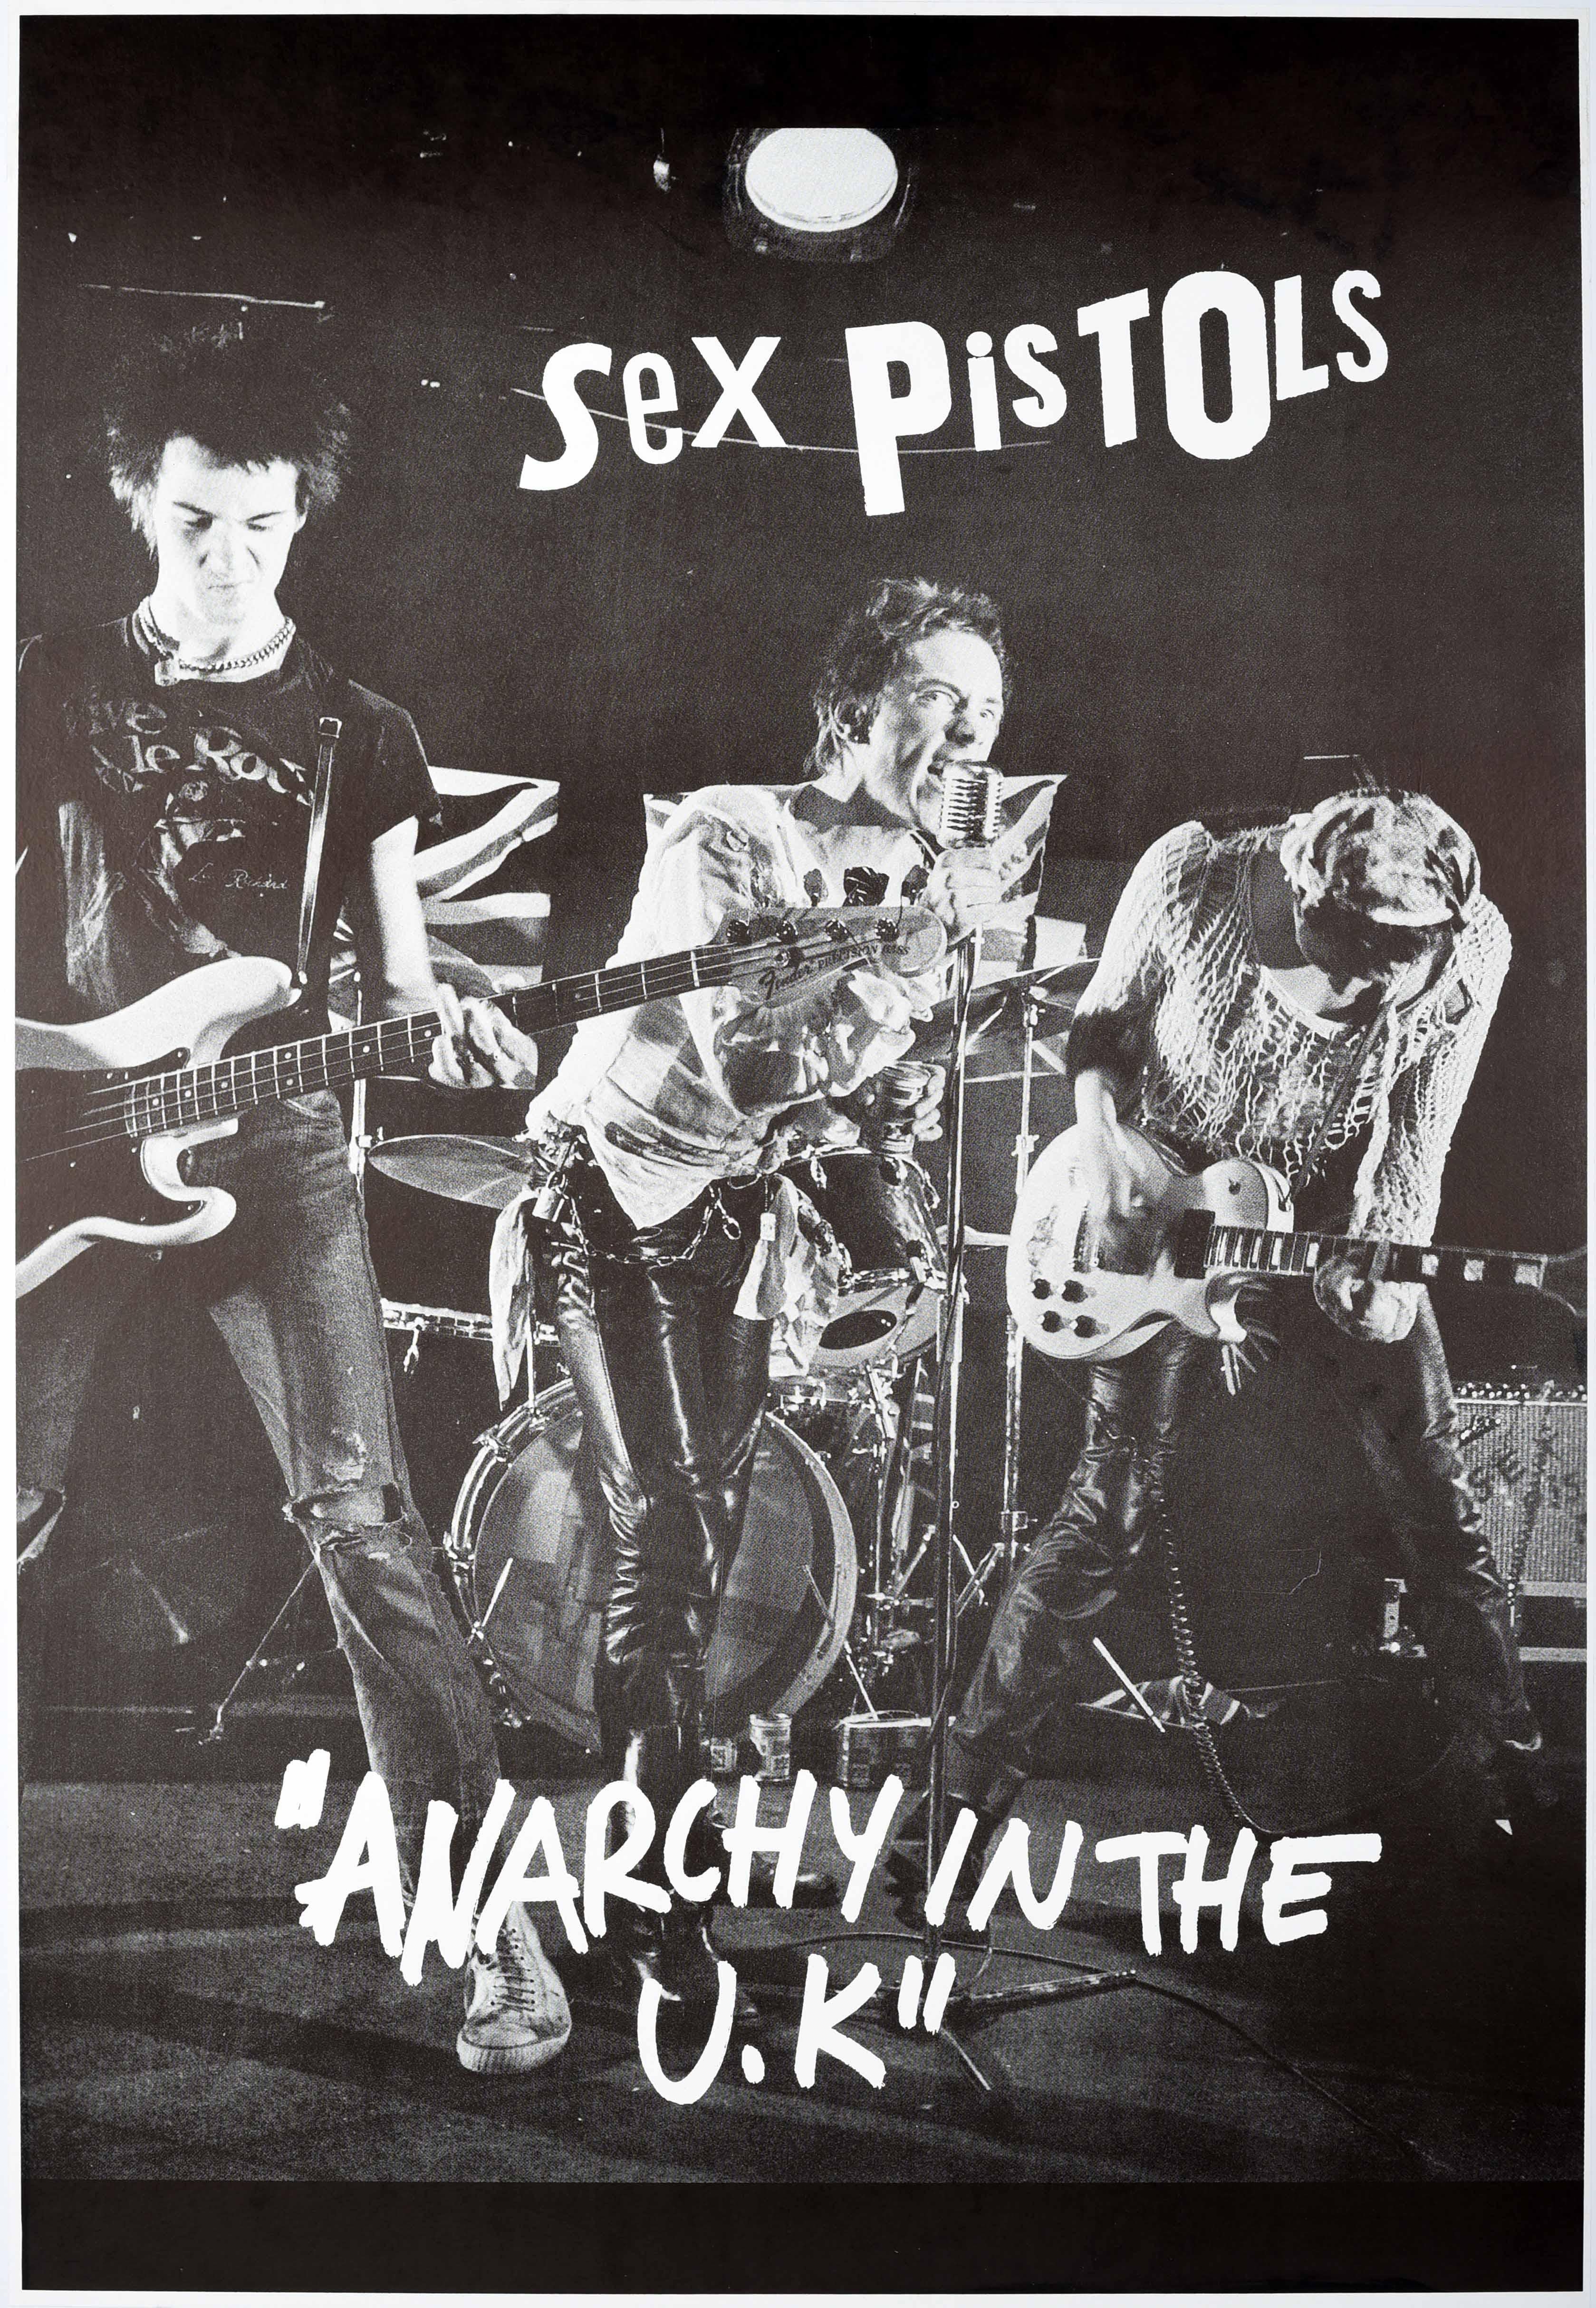 Unknown Print - Original Vintage Advertising Poster Sex Pistols Anarchy In The UK Punk Music Art